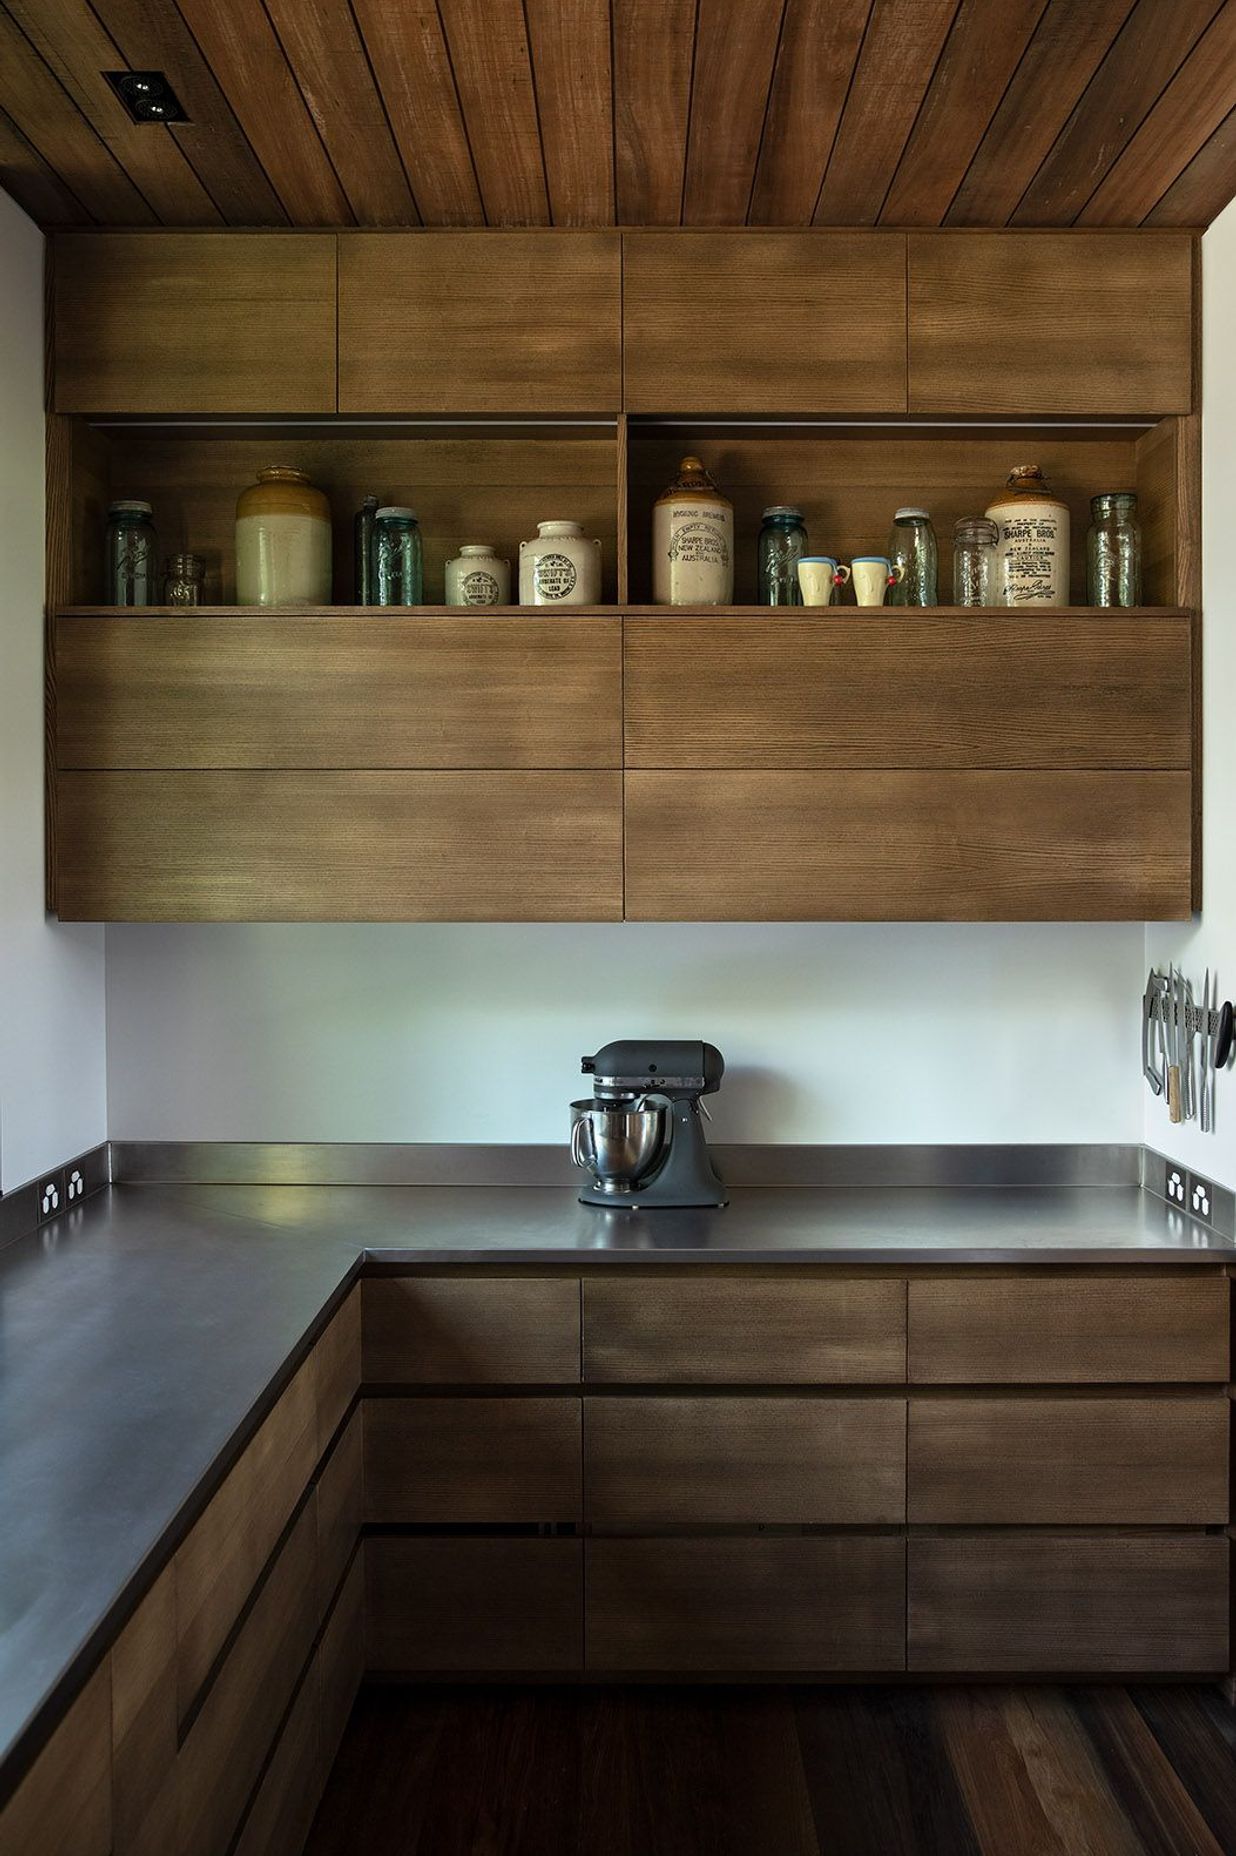 The scullery features plenty of bench space and bespoke built-in cabinetry.